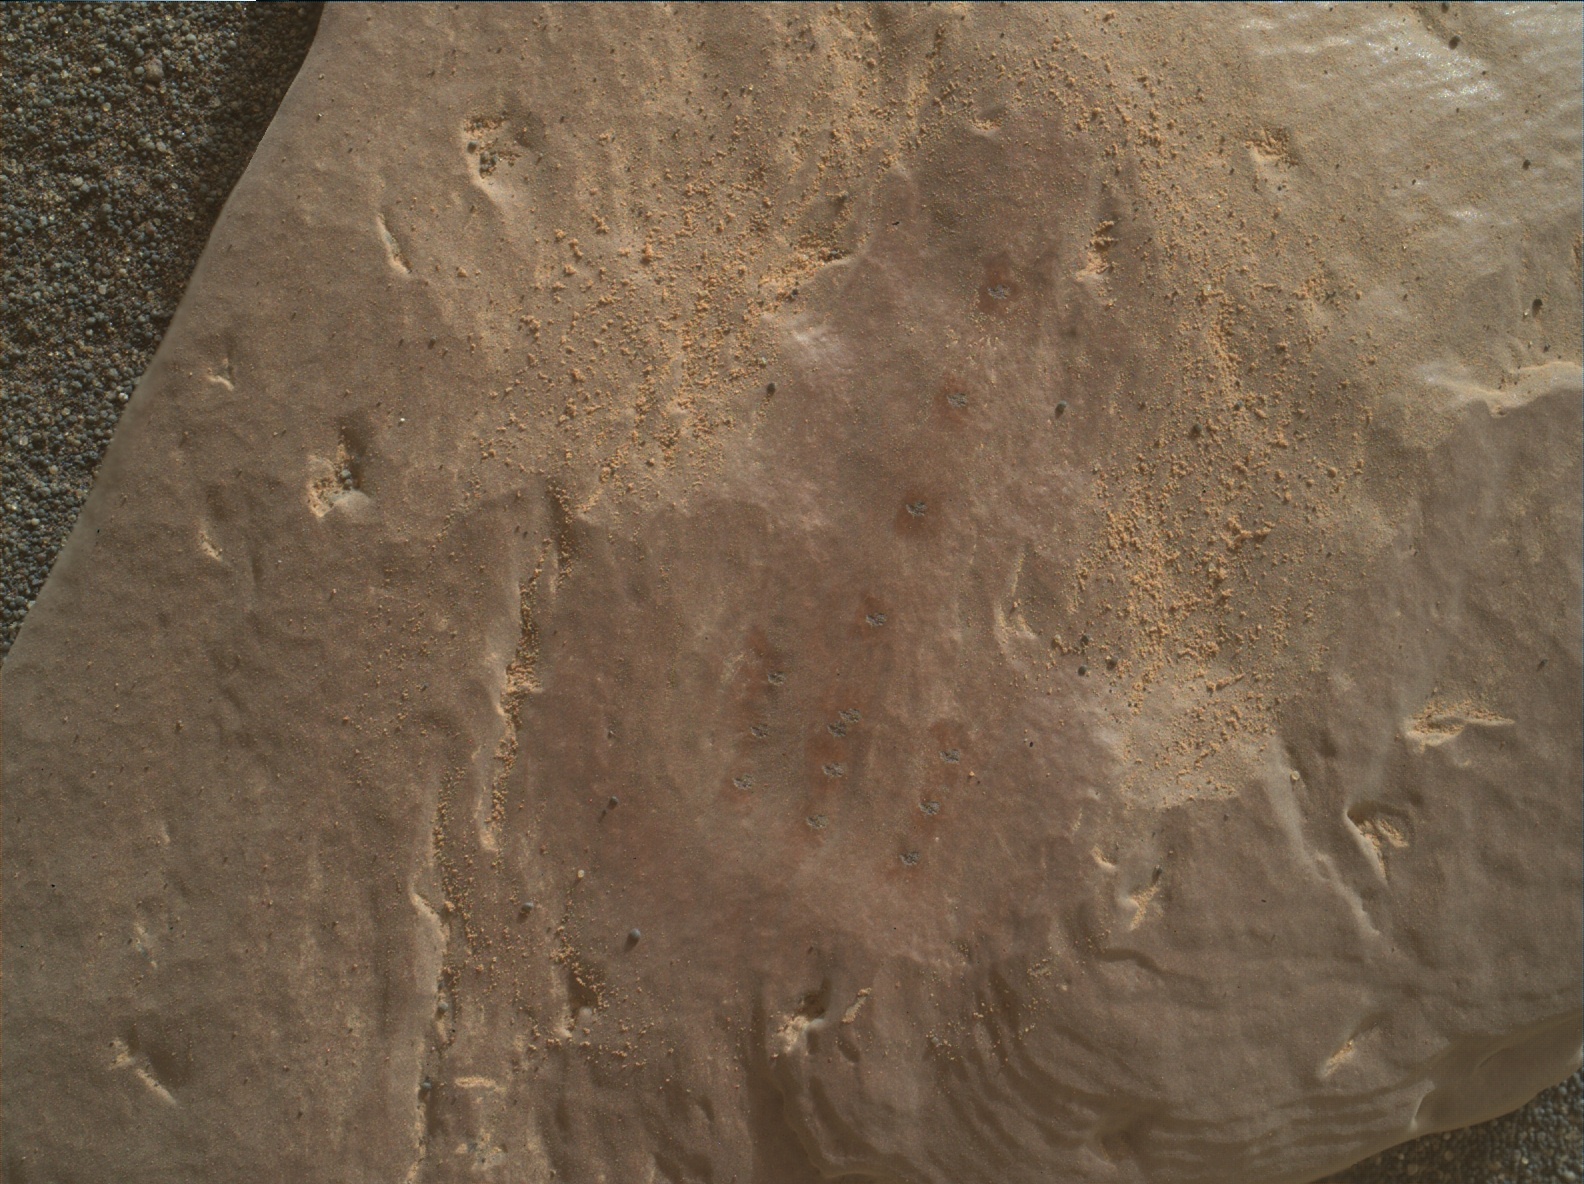 Nasa's Mars rover Curiosity acquired this image using its Mars Hand Lens Imager (MAHLI) on Sol 2364